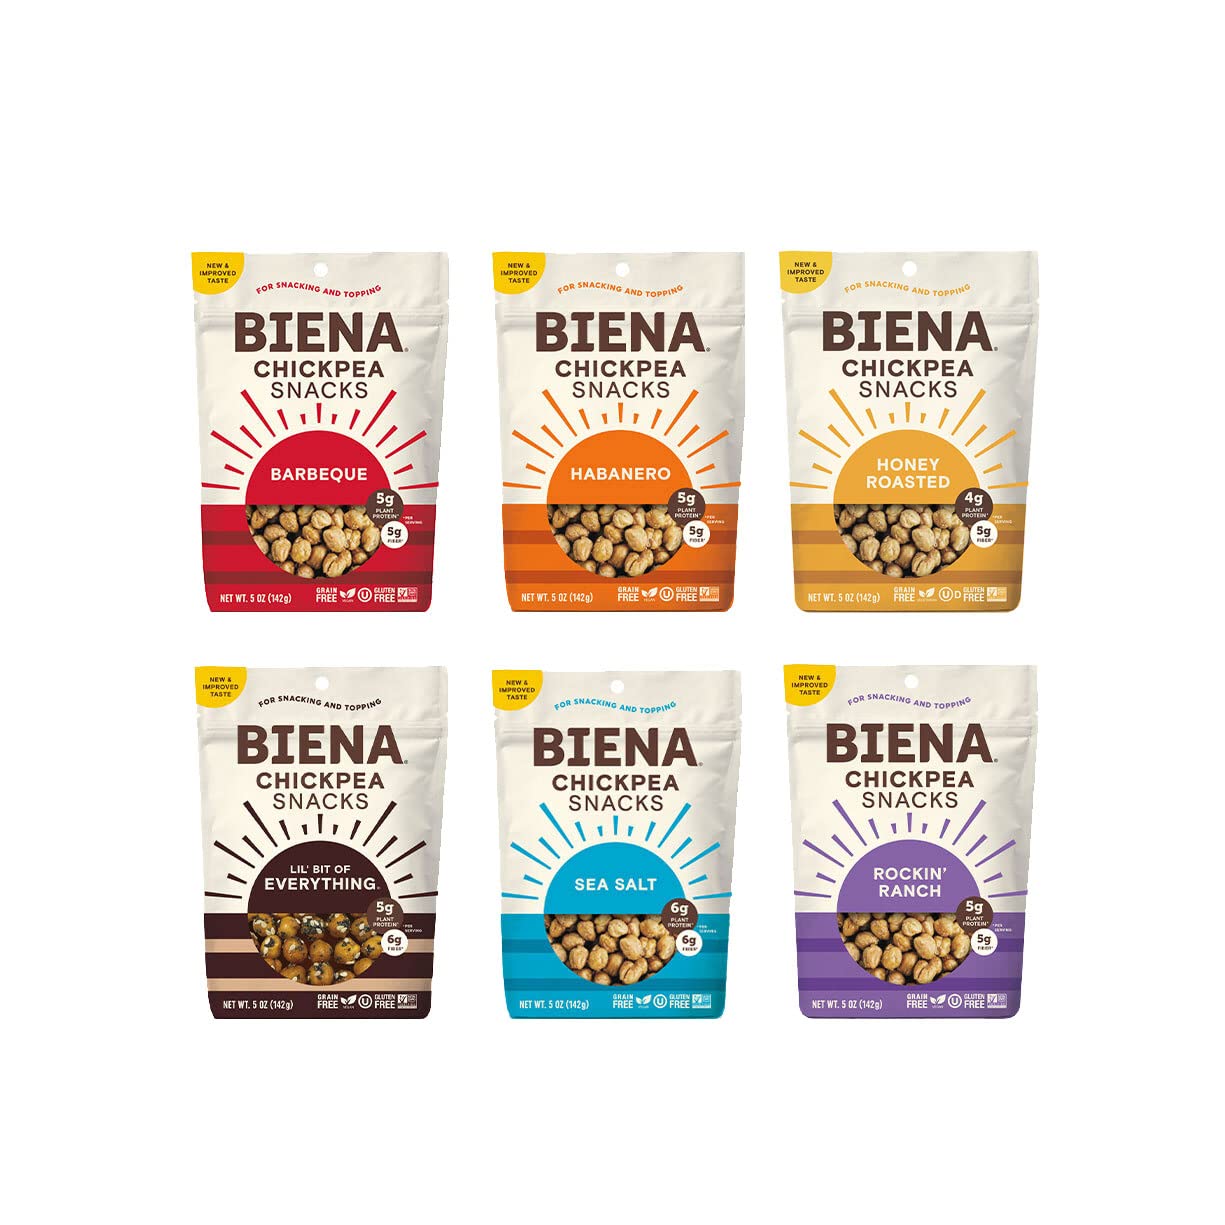 Biena Crispy Roasted Chickpea Snacks, Lil’ Bit of Everything, High Protein Snacks, High Fiber Snacks, Gluten Free, Plant-Based, Non-GMO, Healthy Snacks for Adults and Kids, 4-Pack 5 Ounce Bags